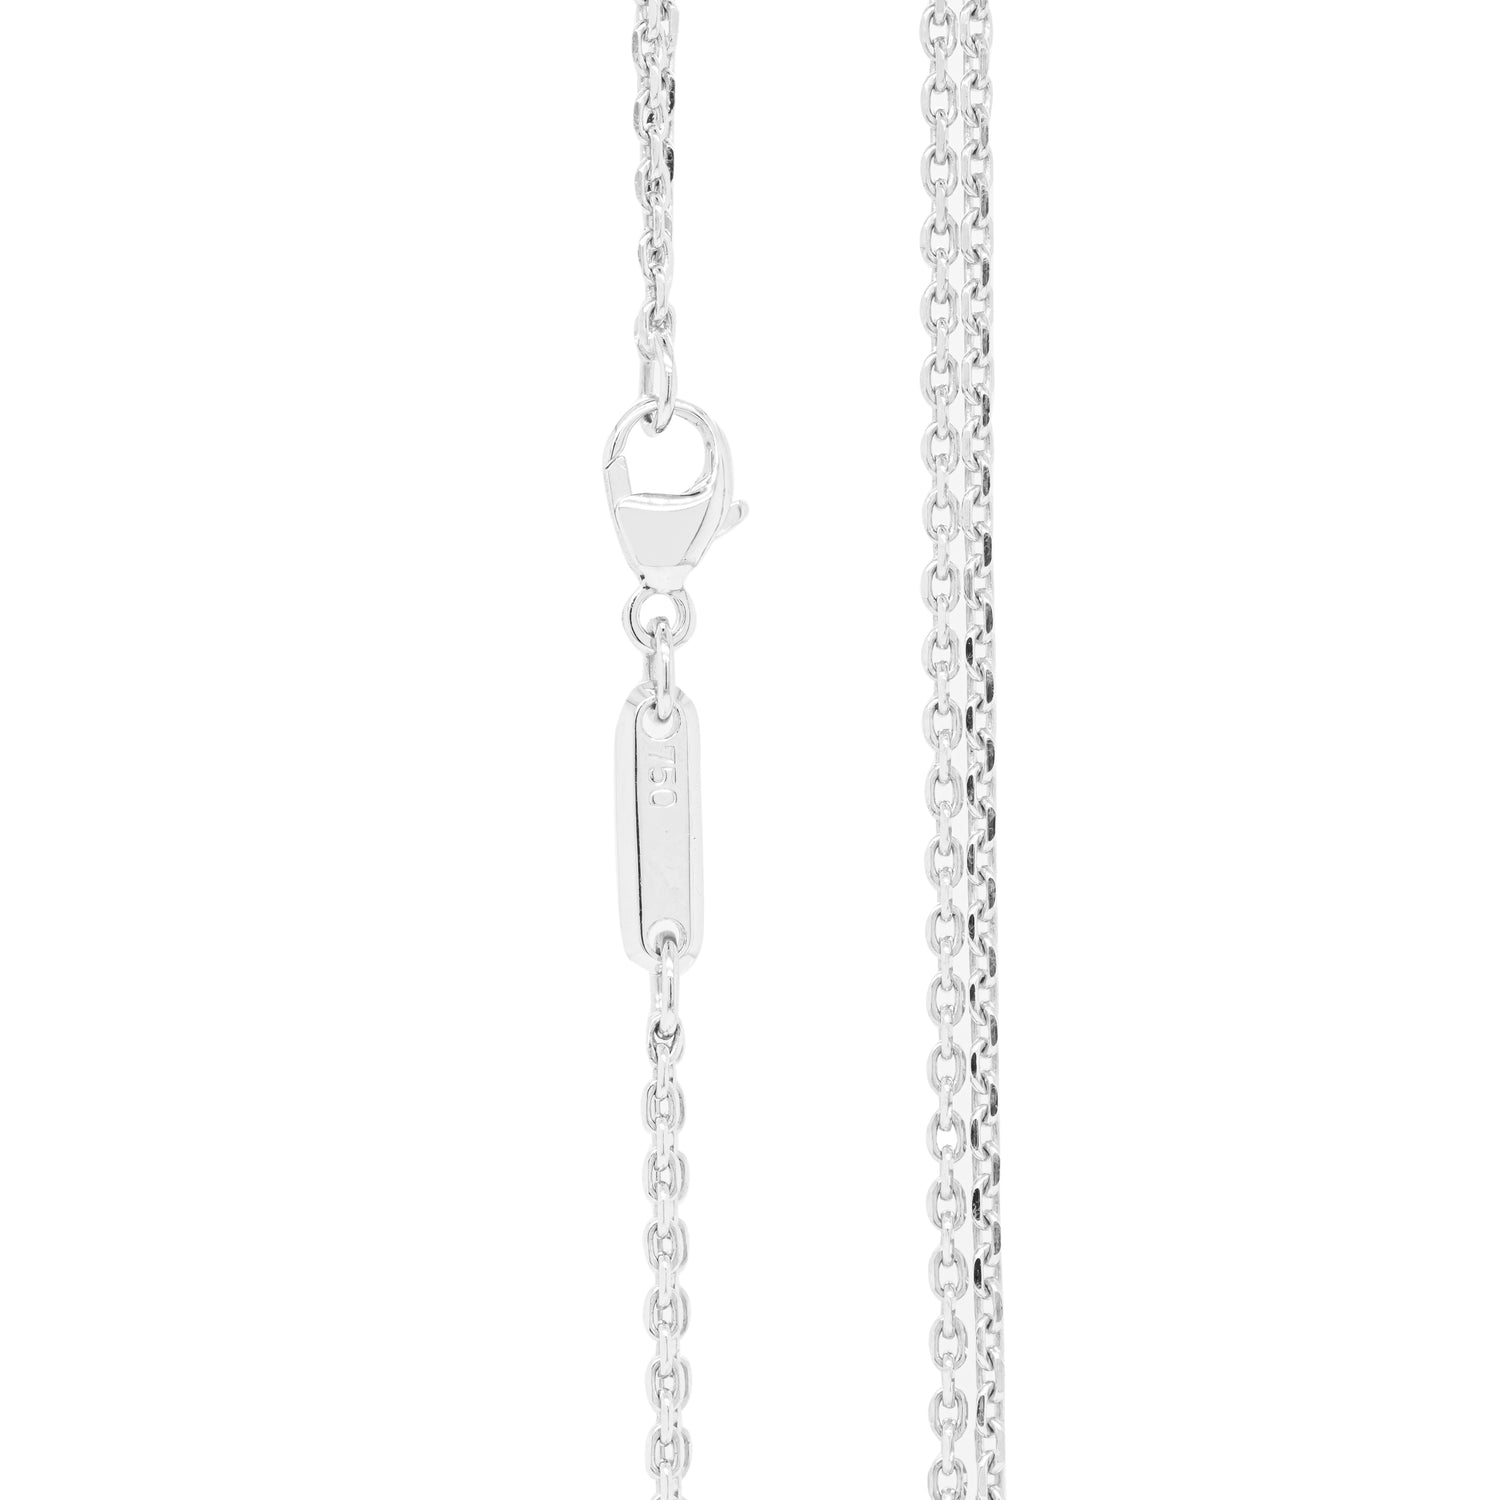 Chopard Large Happy Diamonds 18 Carat White Gold Loop Heart Pendant and Chain